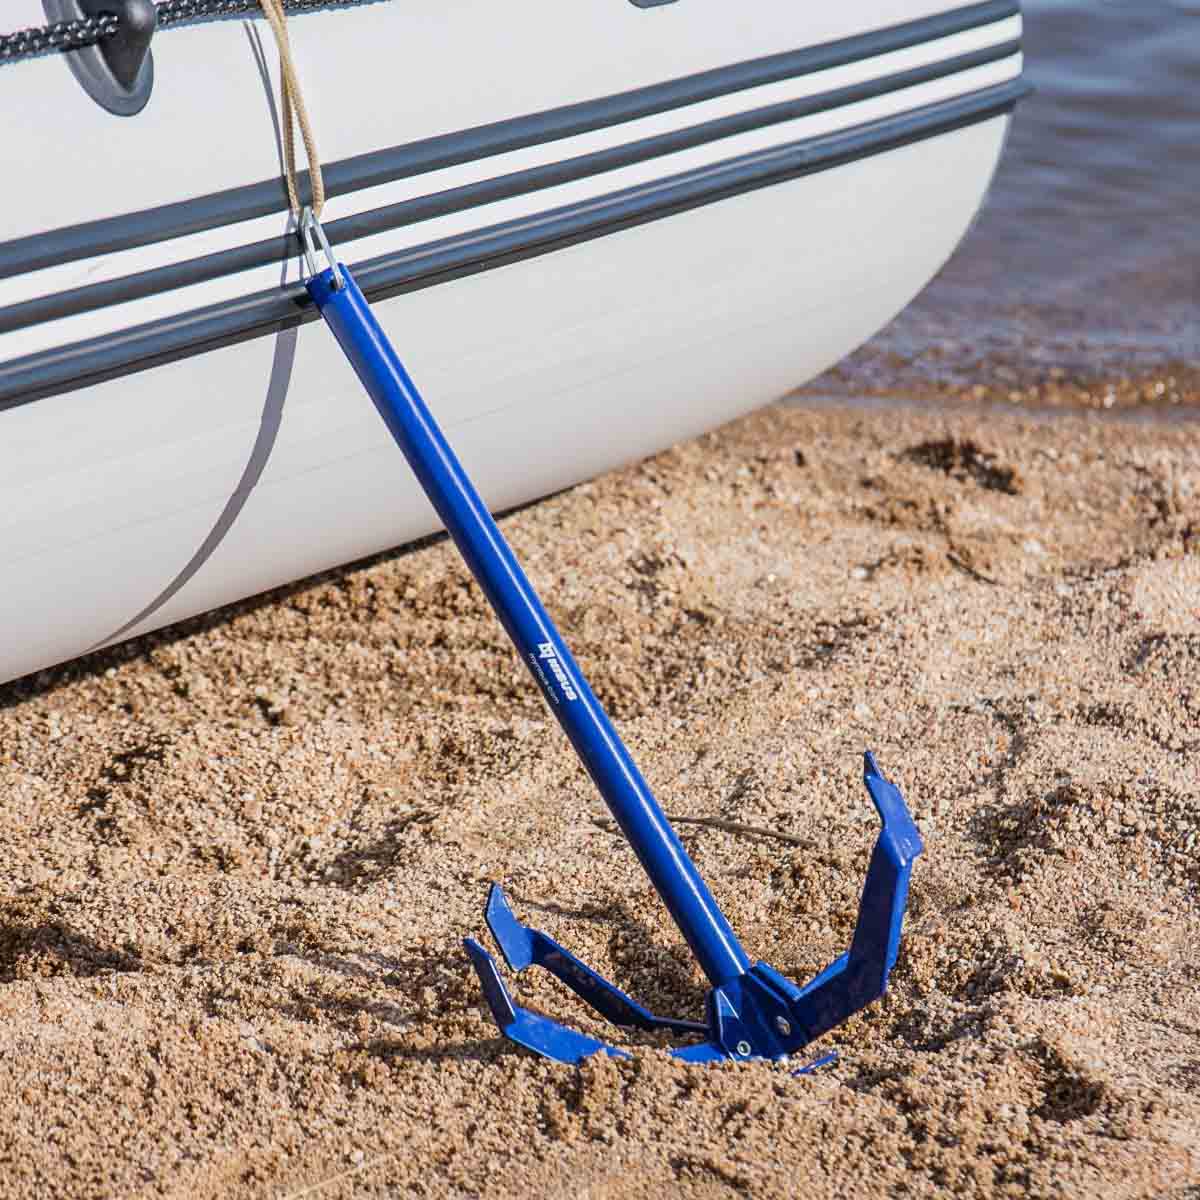 3 lbs Grapnel Portable Folding Anchor on the sand